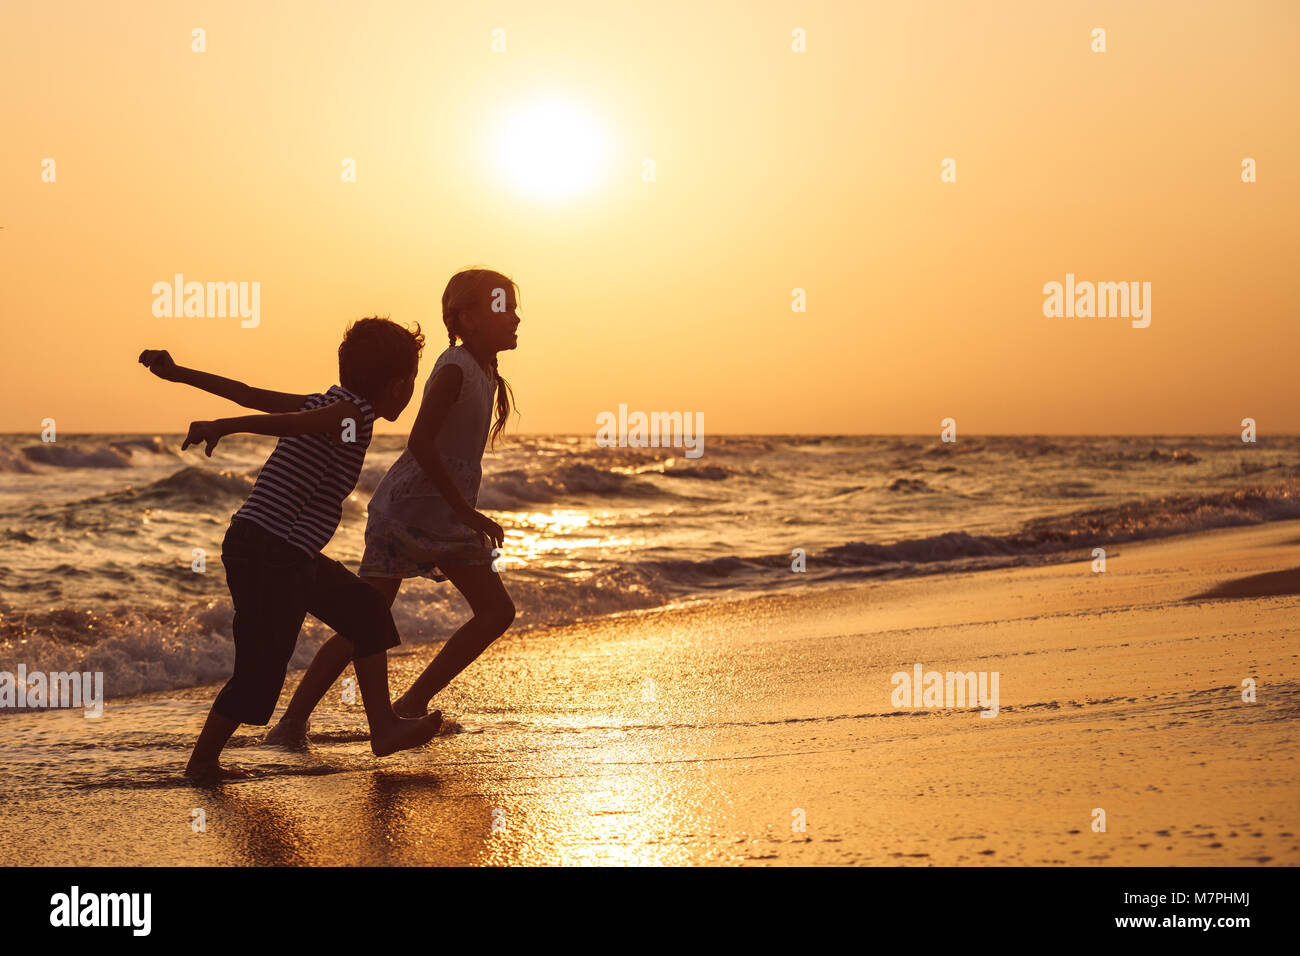 Happy children playing on the beach at the sunset time.Two Kids having fun outdoors. Concept of summer vacation and friendly family. Stock Photo